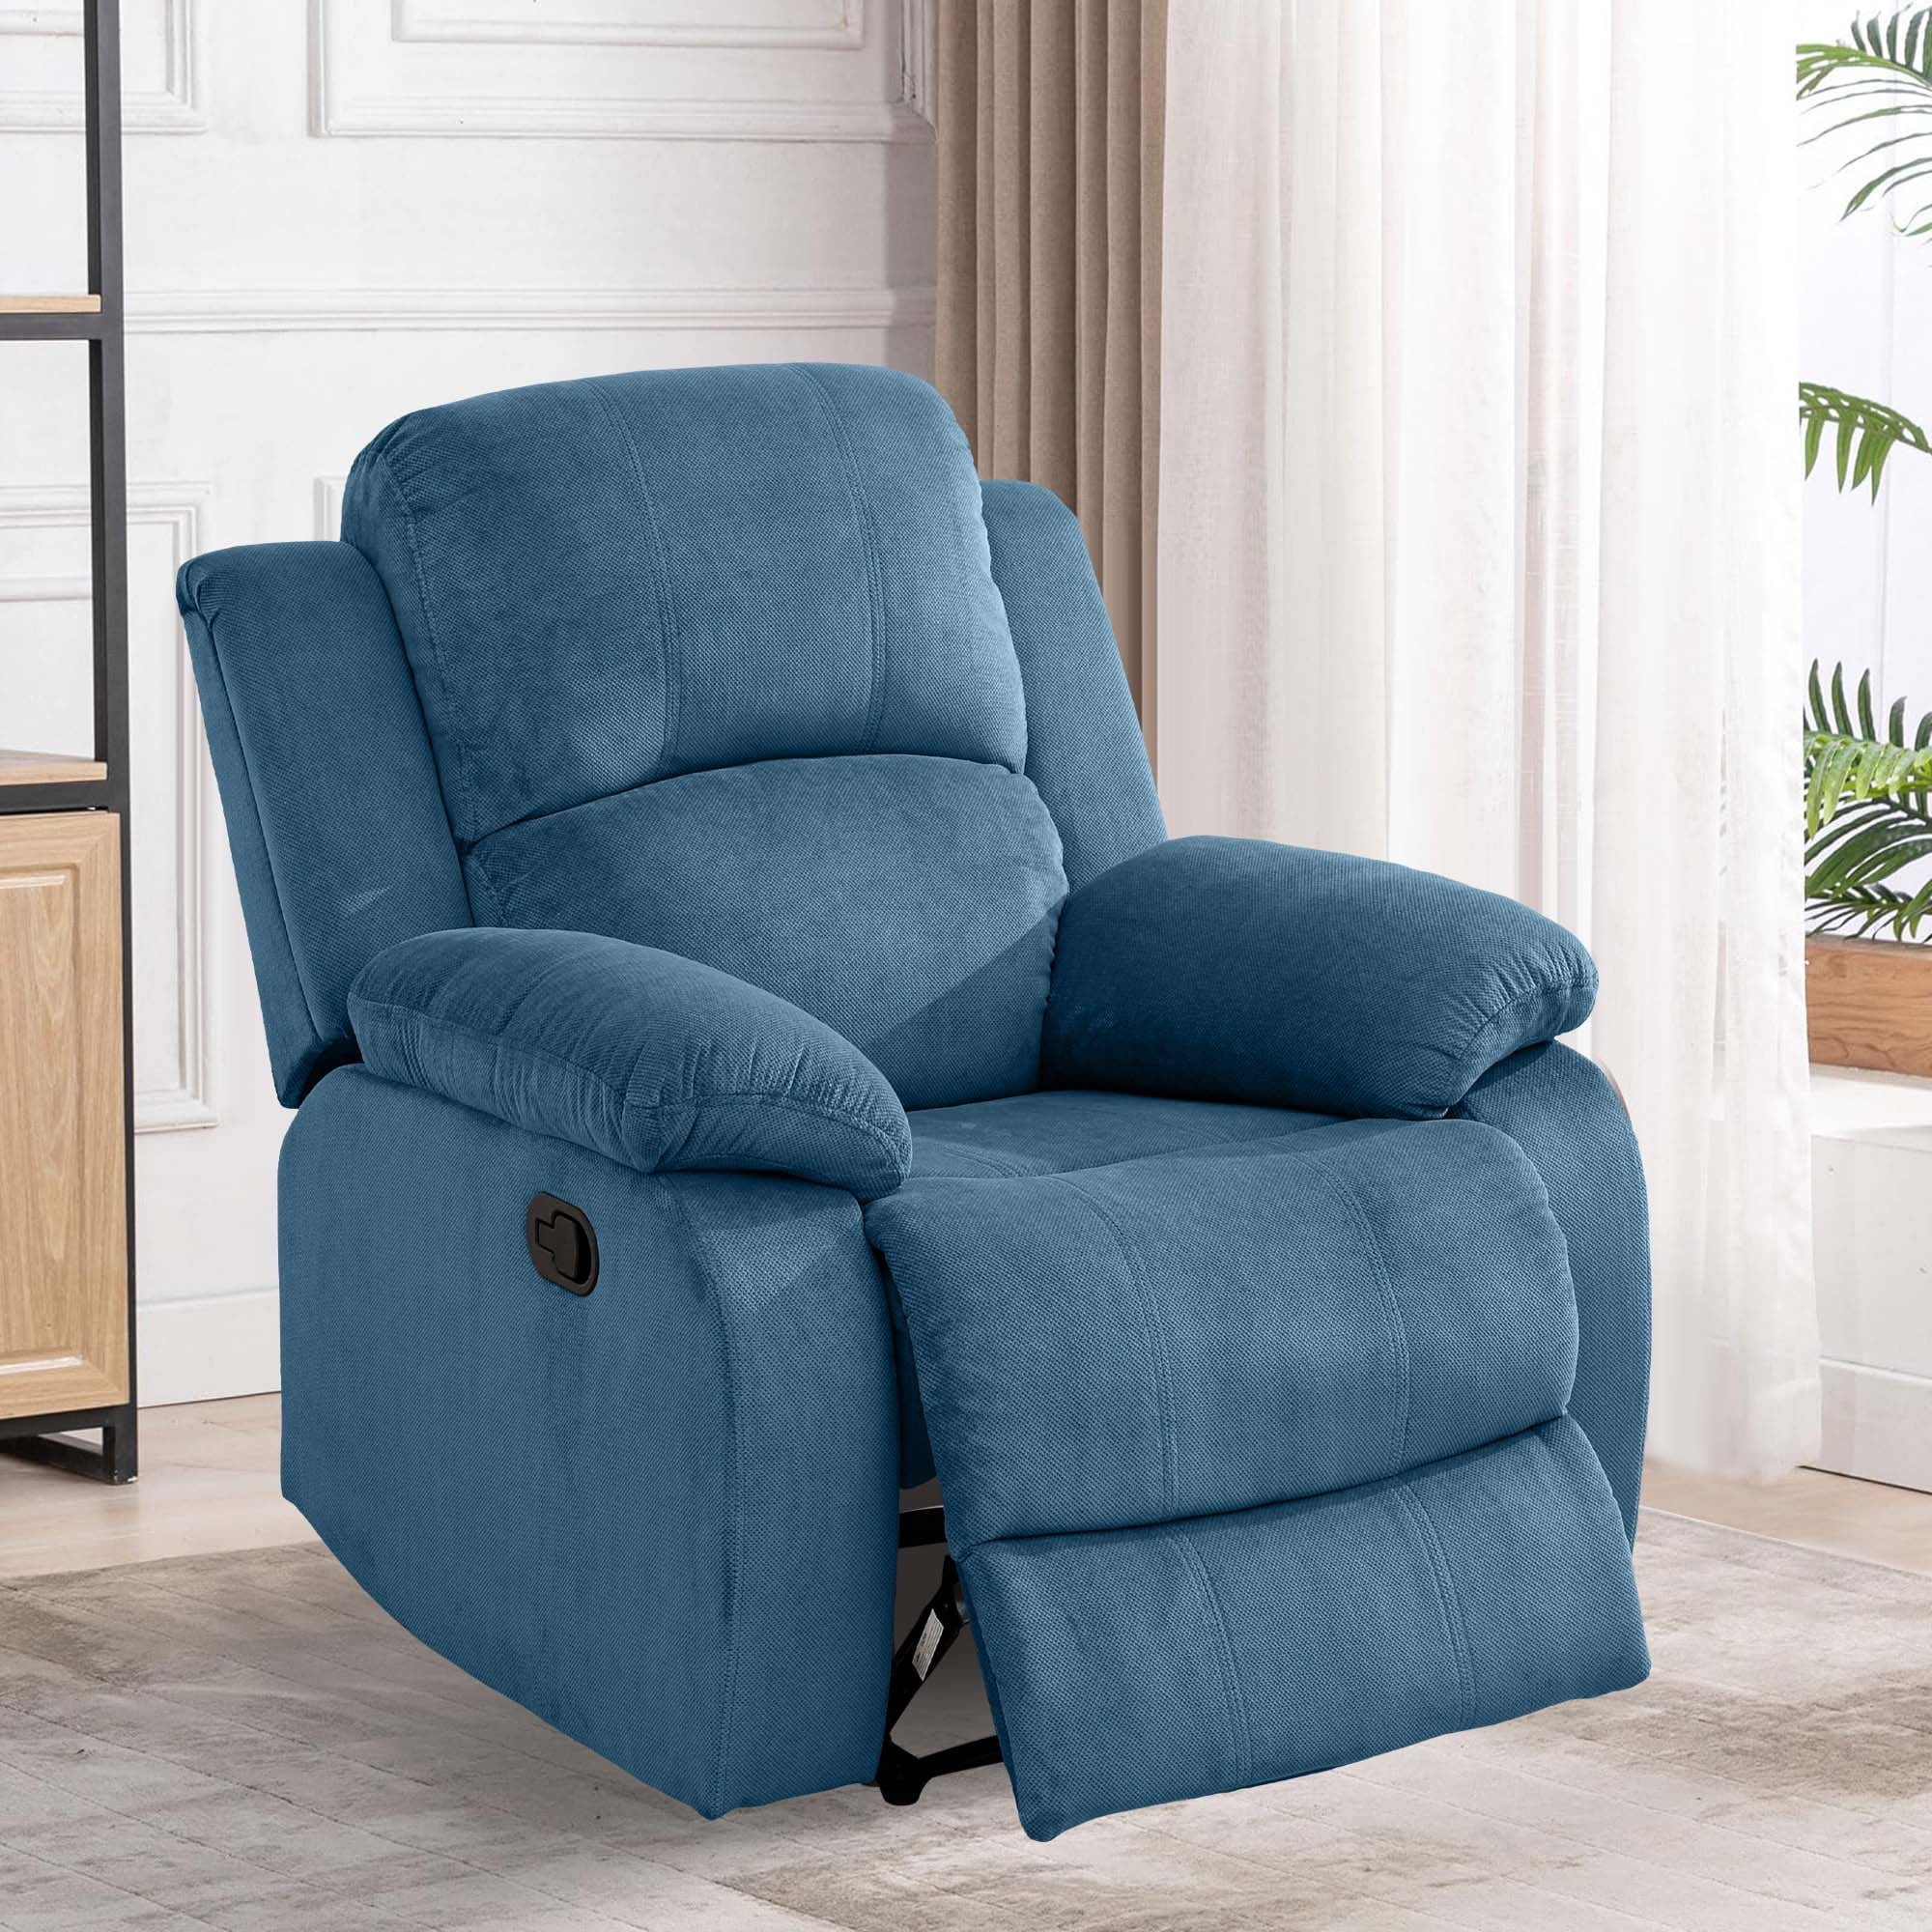 Sink into Serenity: Exploring the Appeal of a Blue Recliner Chair插图4